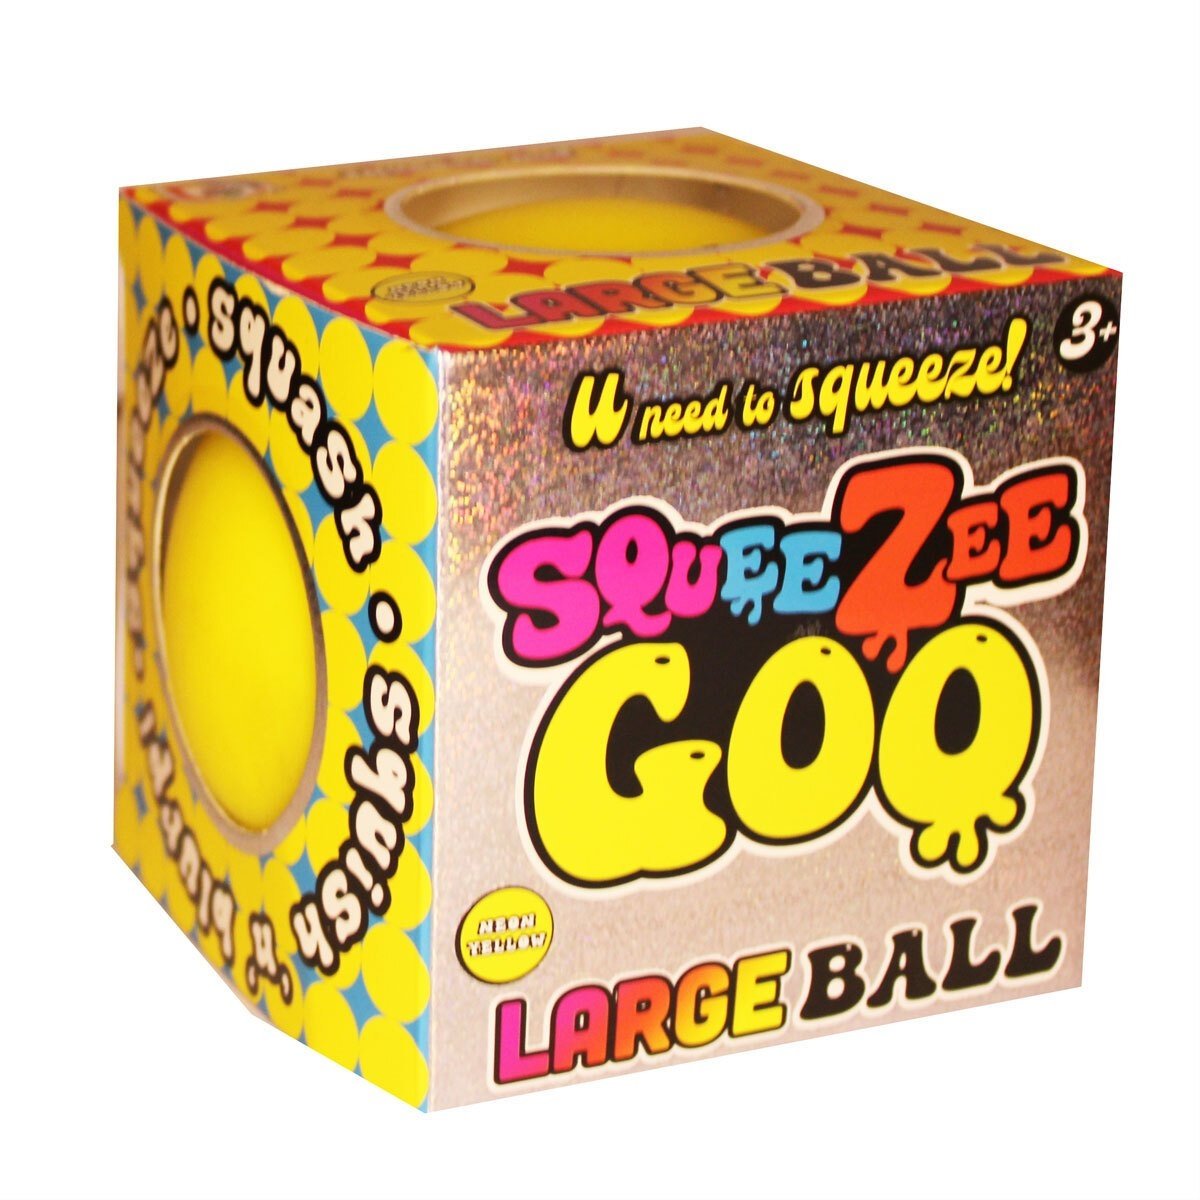 SqueeZee Goo Large Ball, Kids will love squishing and stretching this large SqueeZee Goo ball fidget toy! The squishy fun just got supersized with this large ball, this neon coloured stress ball is filled with oozy goo. Kids will love watching it squash out when they squeeze, returning to its original shape as they let go. Product features Kids will love squishing, smushing and squeezing Bring on the go for fidget-friendly fun Kids can try squeezing it when they need soothing Suitable for age 3 years + Spec